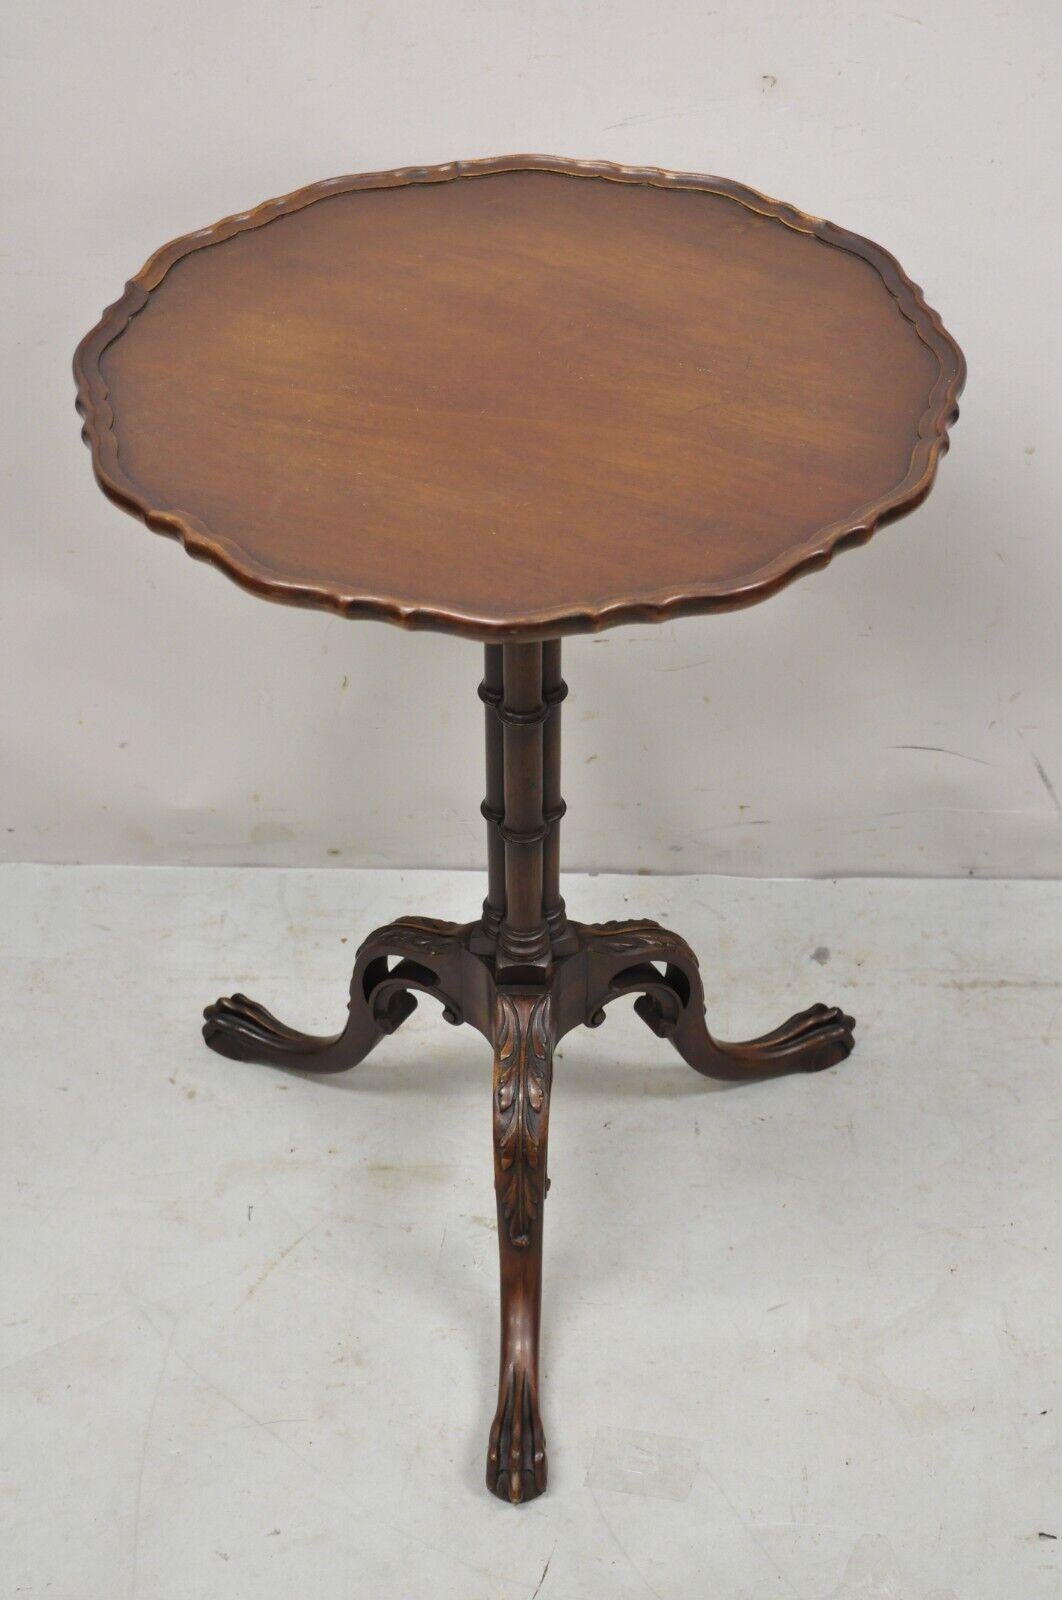 Vintage Imperial mahogany Georgian Style pedestal base tea table side table. Item features carved paw feet, pedestal base, beautiful wood grain, nicely carved details, original label, very nice vintage item, great style and form. Circa Early 20th